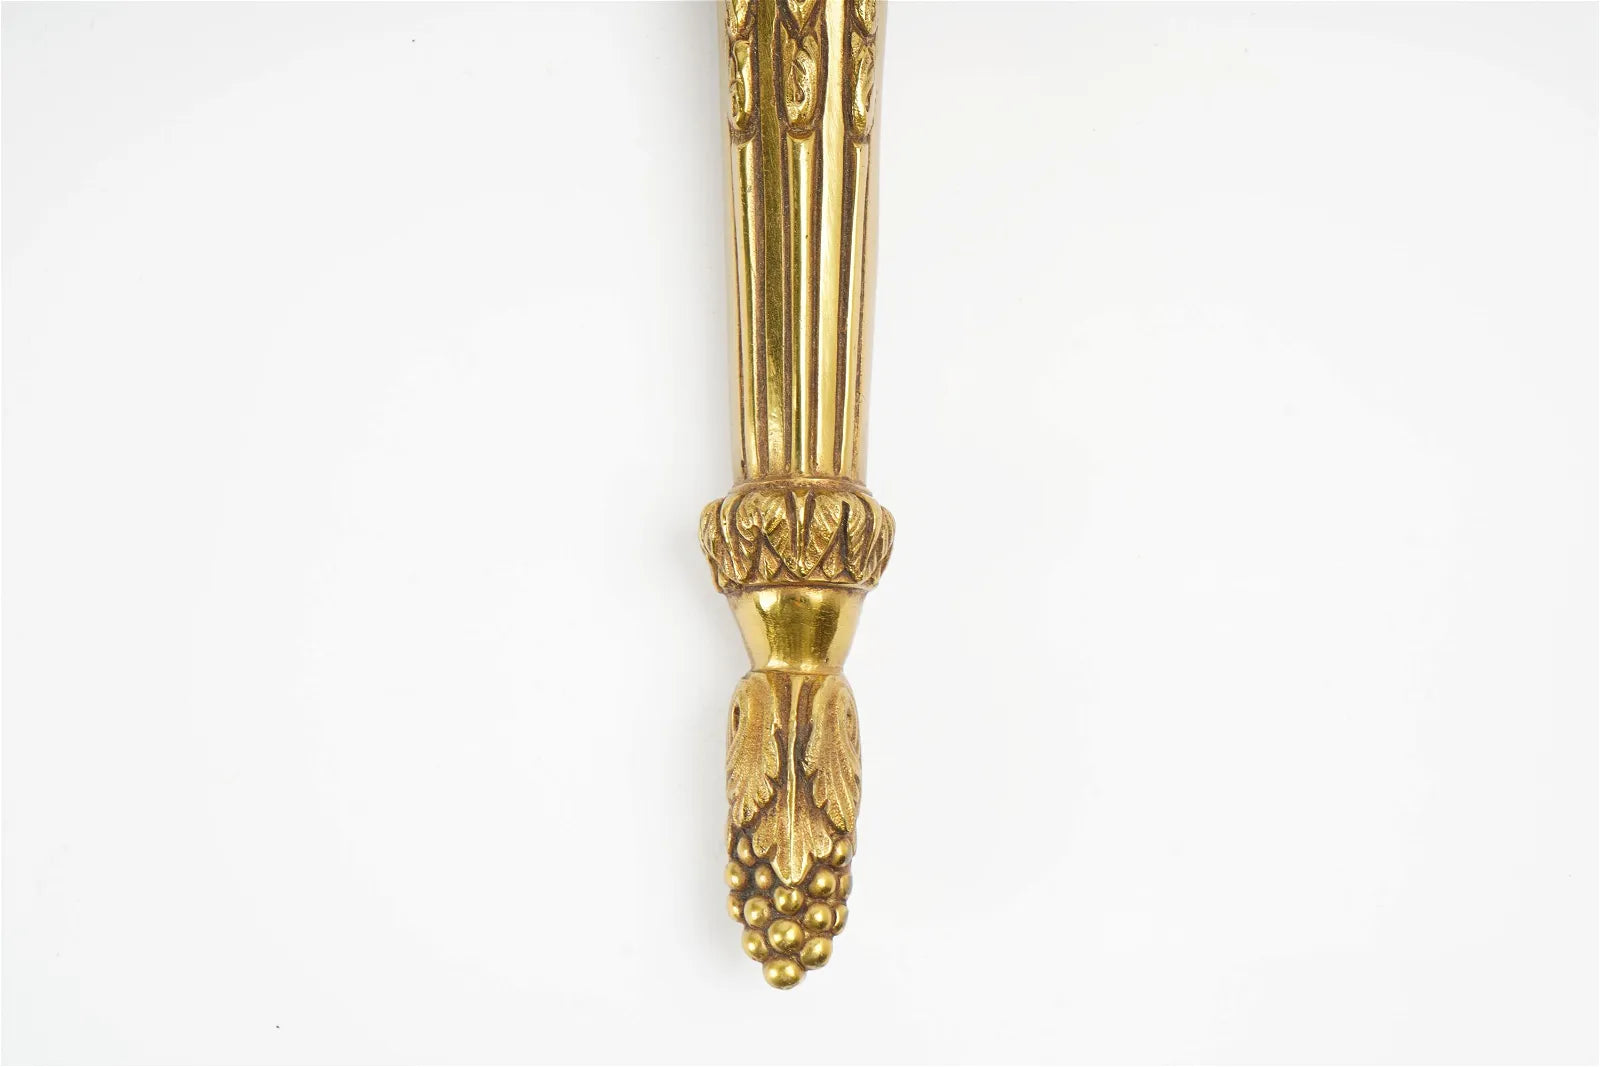 AL3-005: PAIR OF EARLY 20TH CENTURY FRENCH NEOCLASSICAL STYLE BRASS 2 LIGHT SCONCES